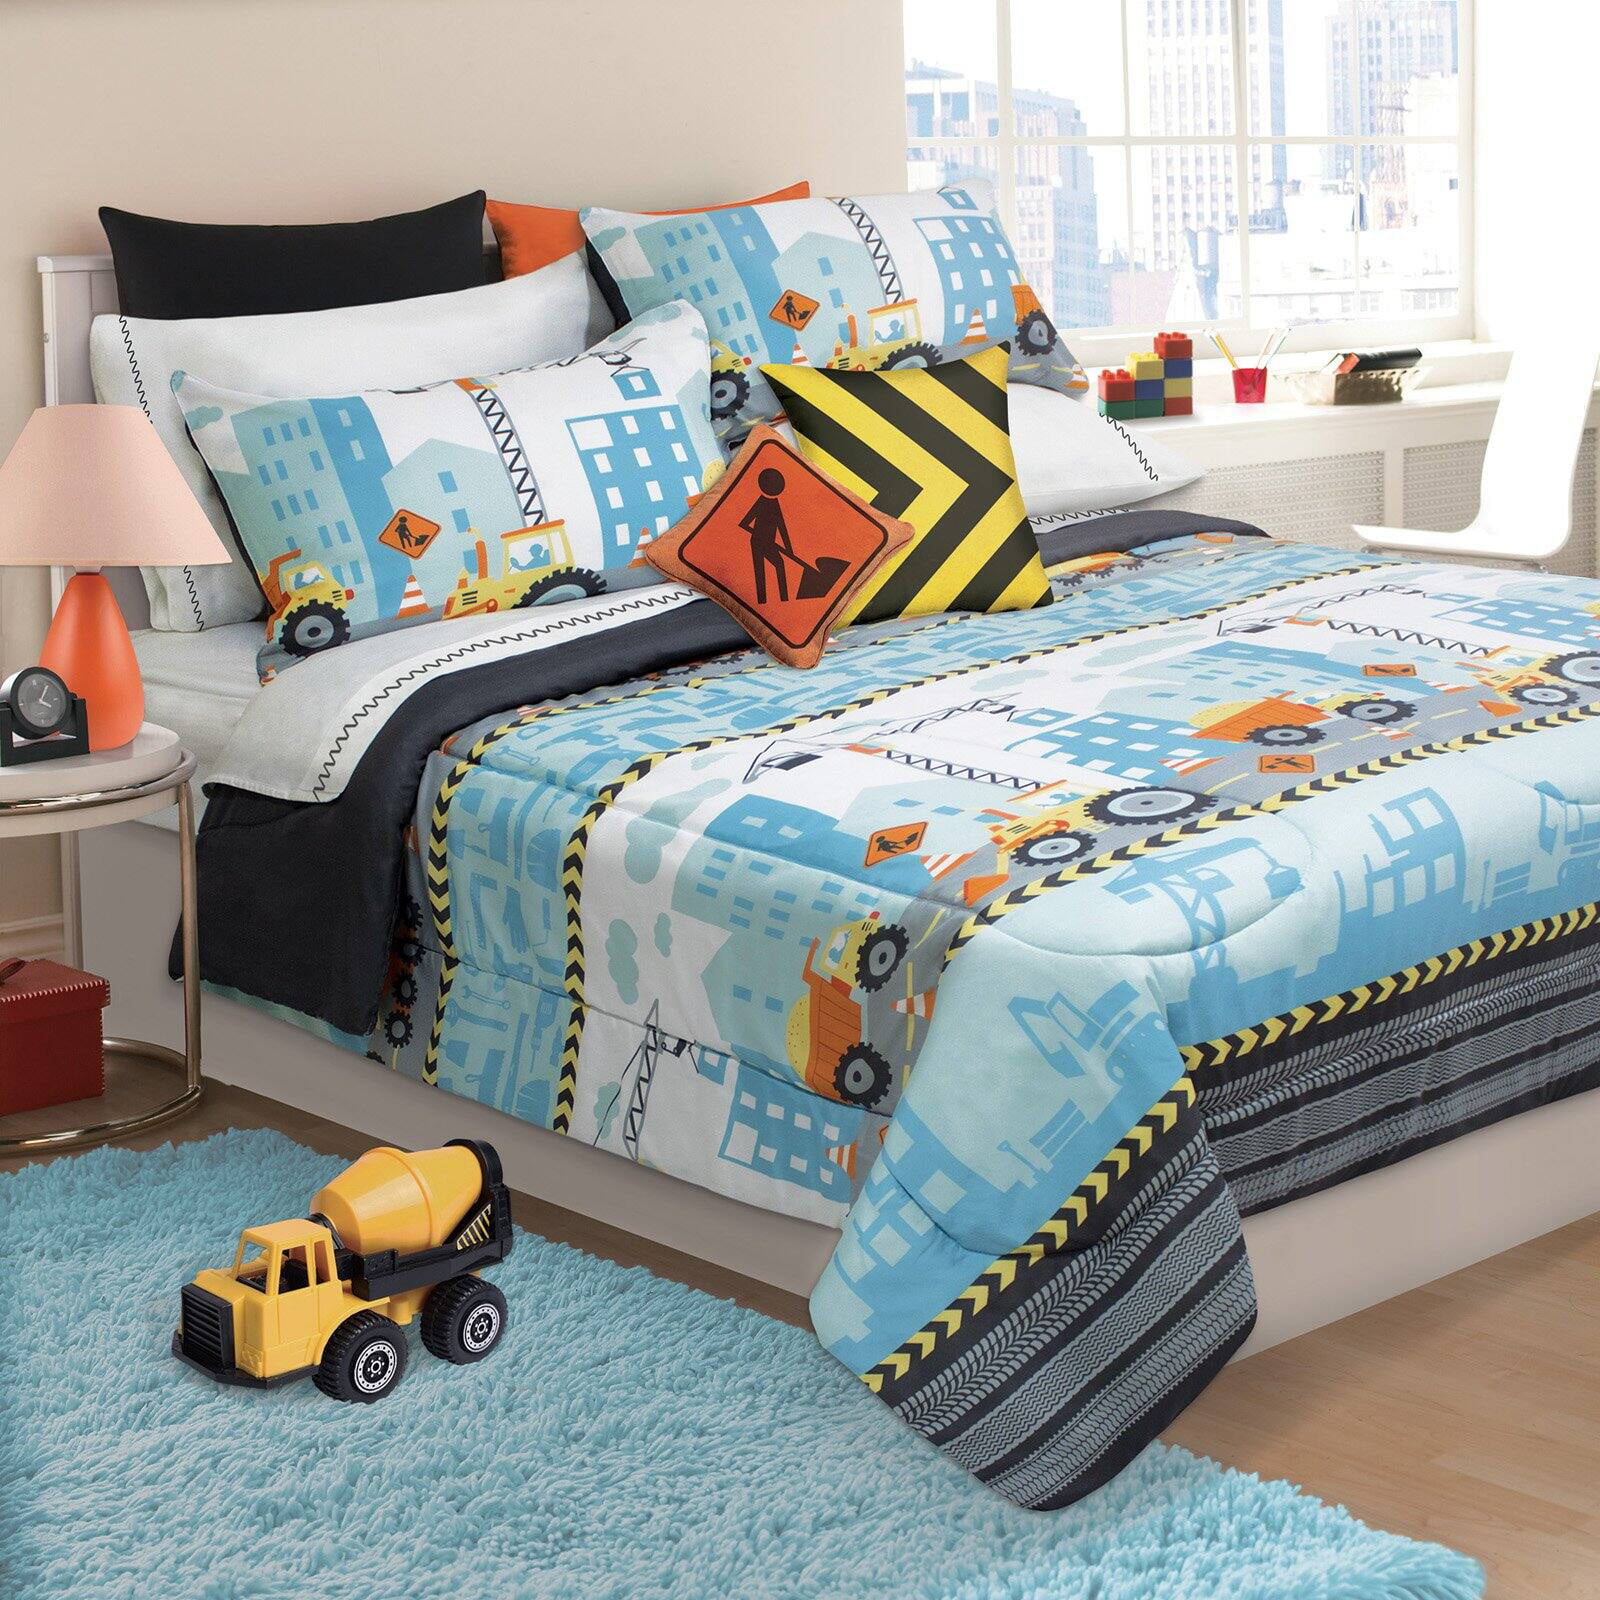 Ambesonne Construction Duvet Cover Set Queen Size Teal Orange Style Vehicles and Heavy Equipment Forklift Earthmover Excavator Mixer Decorative 3 Piece Bedding Set with 2 Pillow Shams